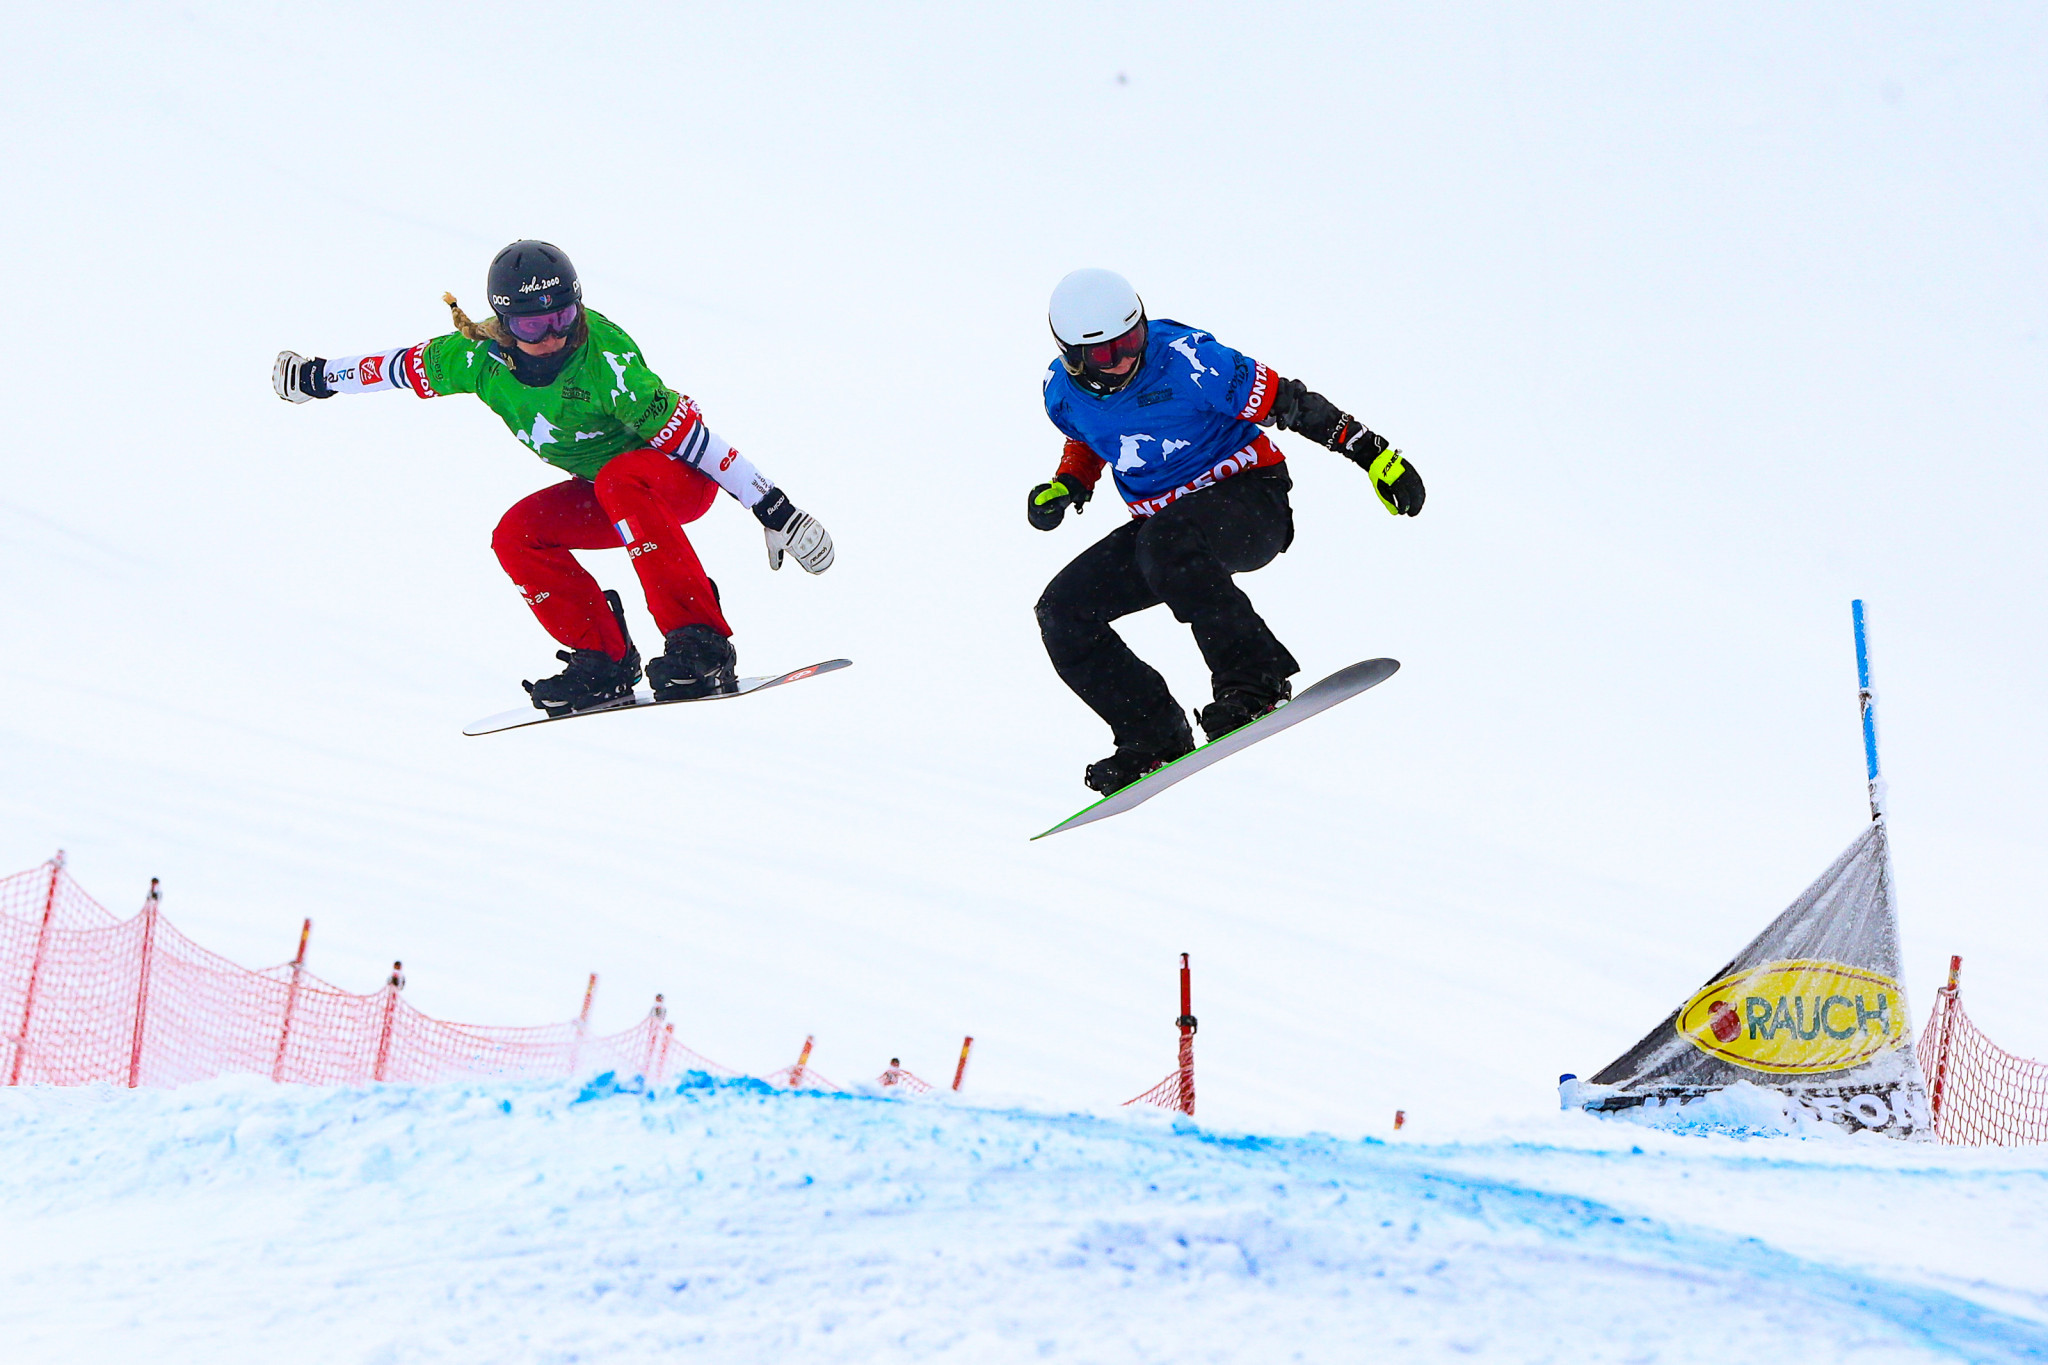 Snowboard Cross World Cup leg in Germany called off as COVID-19 cases rise